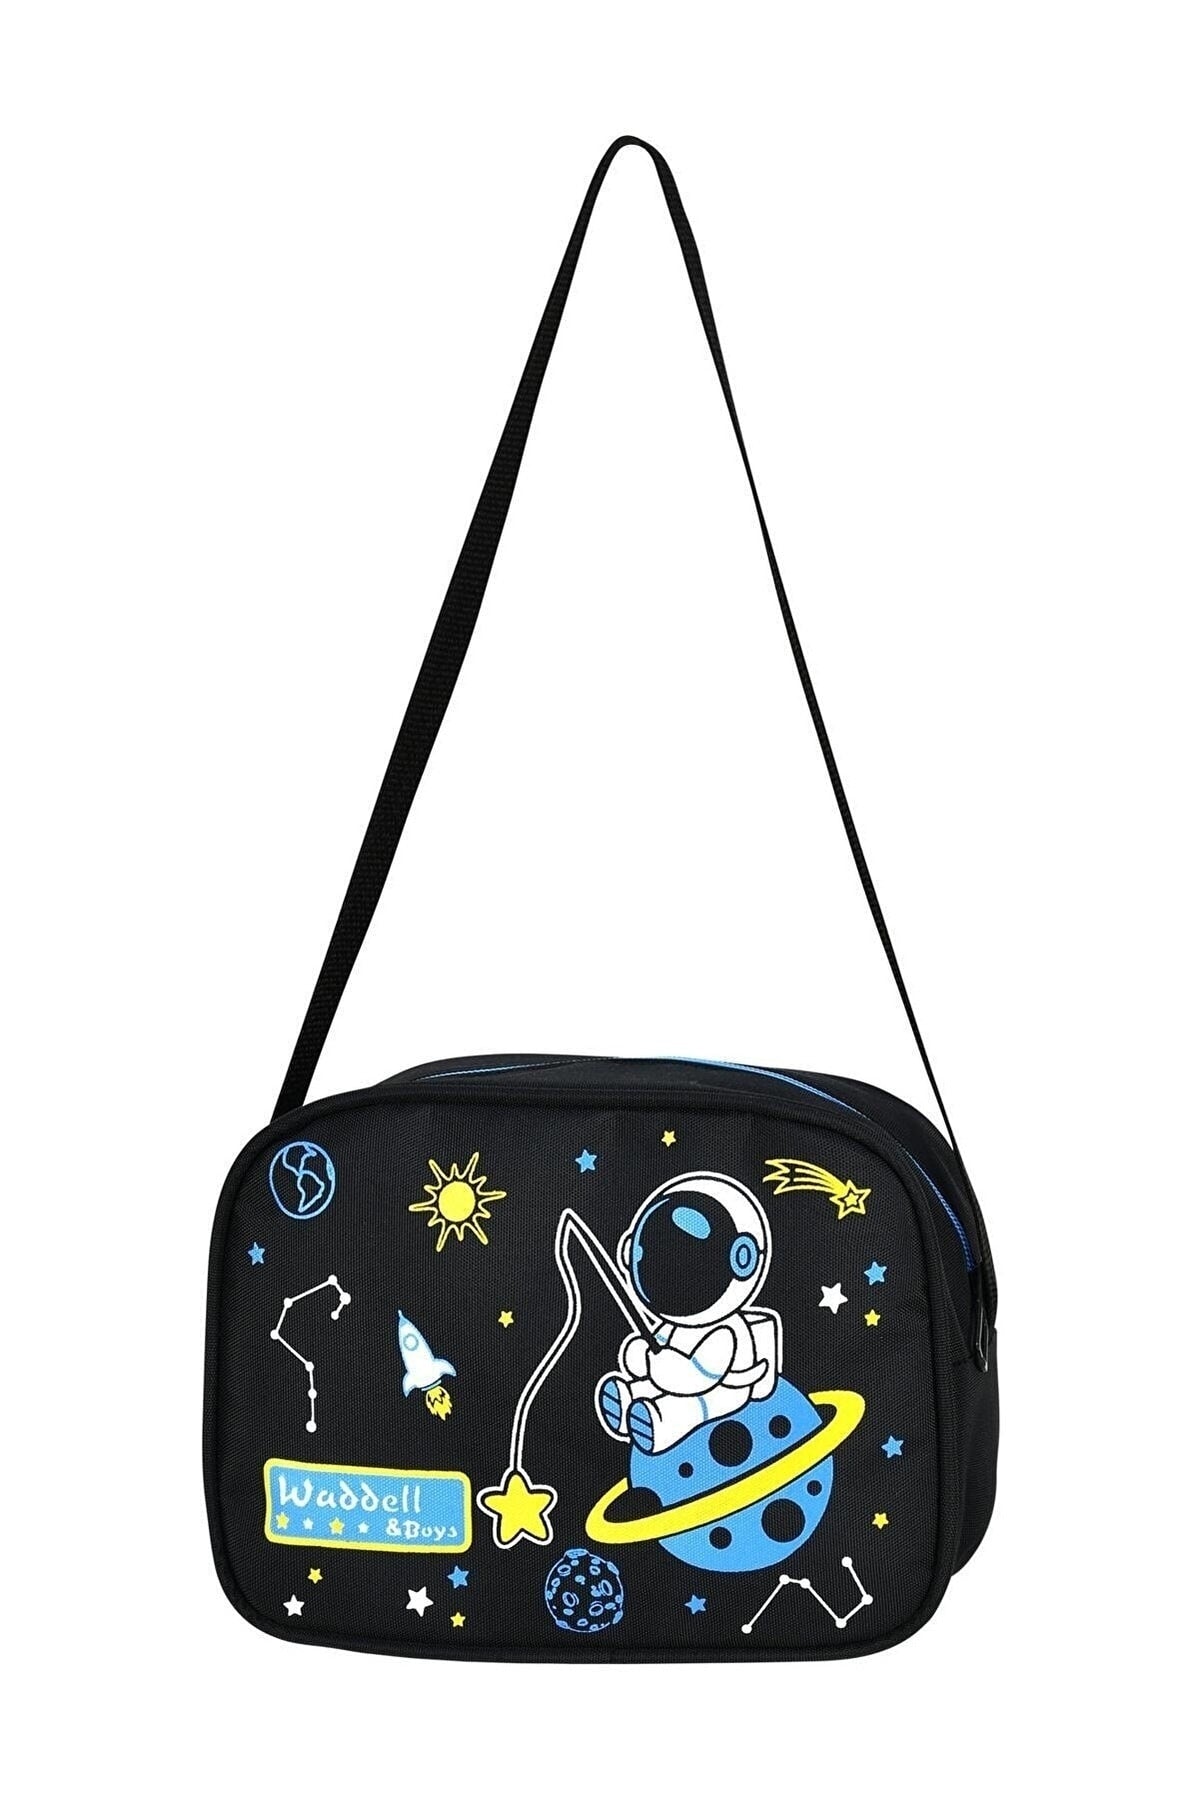 Licensed Astronaut Patterned Primary School Bag And Lunch Box